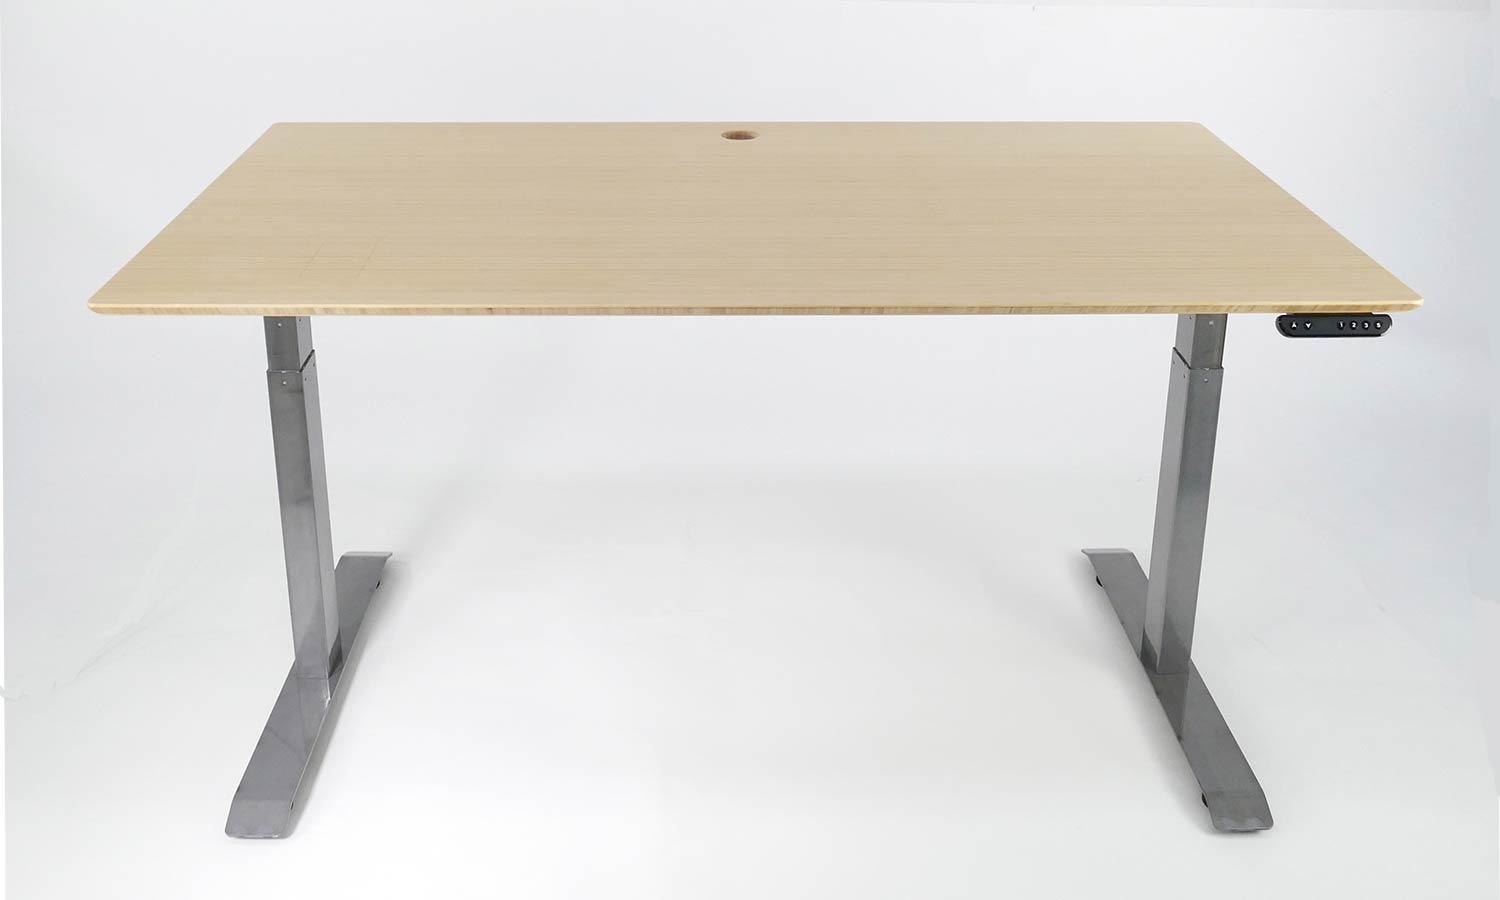 Stand Desk in natural bamboo with 1550 x 800 top and industrial steel frame